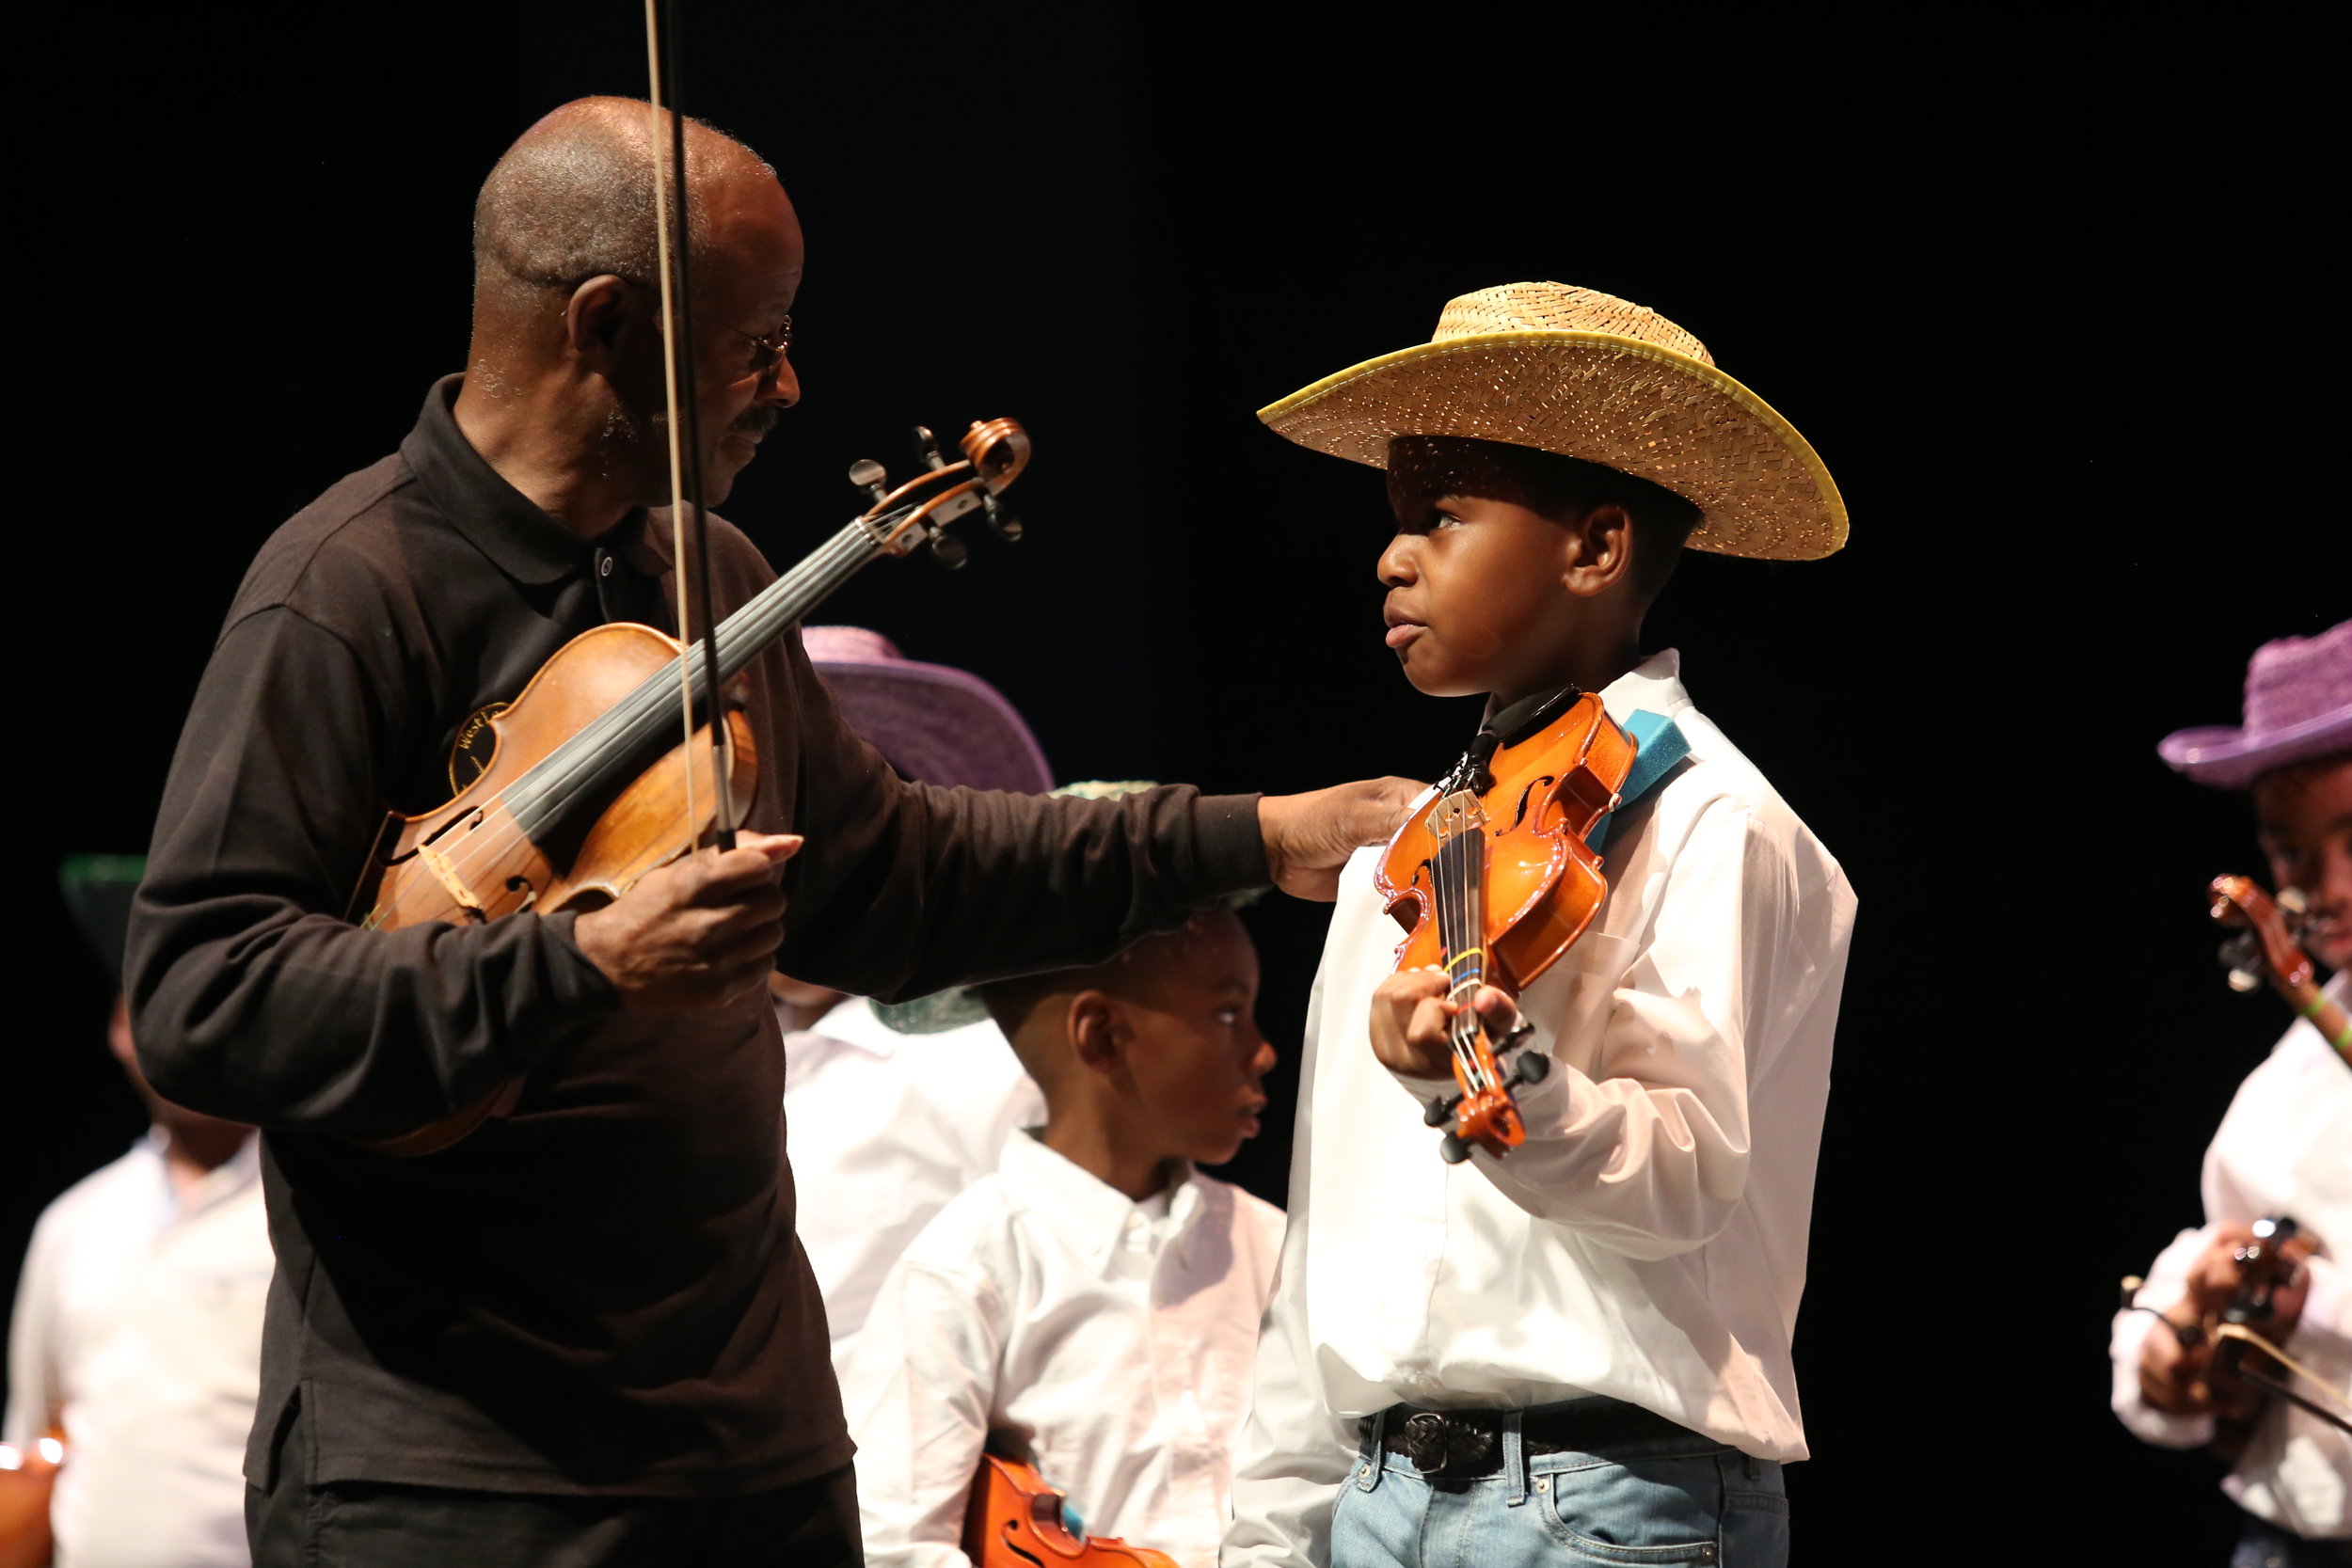  Mr. Keith Cook, ArtsReach violin instructor, helps a Young Masters violin student get ready to perform at The ArtsReach Showcase.  For more photos from that night: https://www.flickr.com/photos/kentuckycenter/albums/72157684538345165  